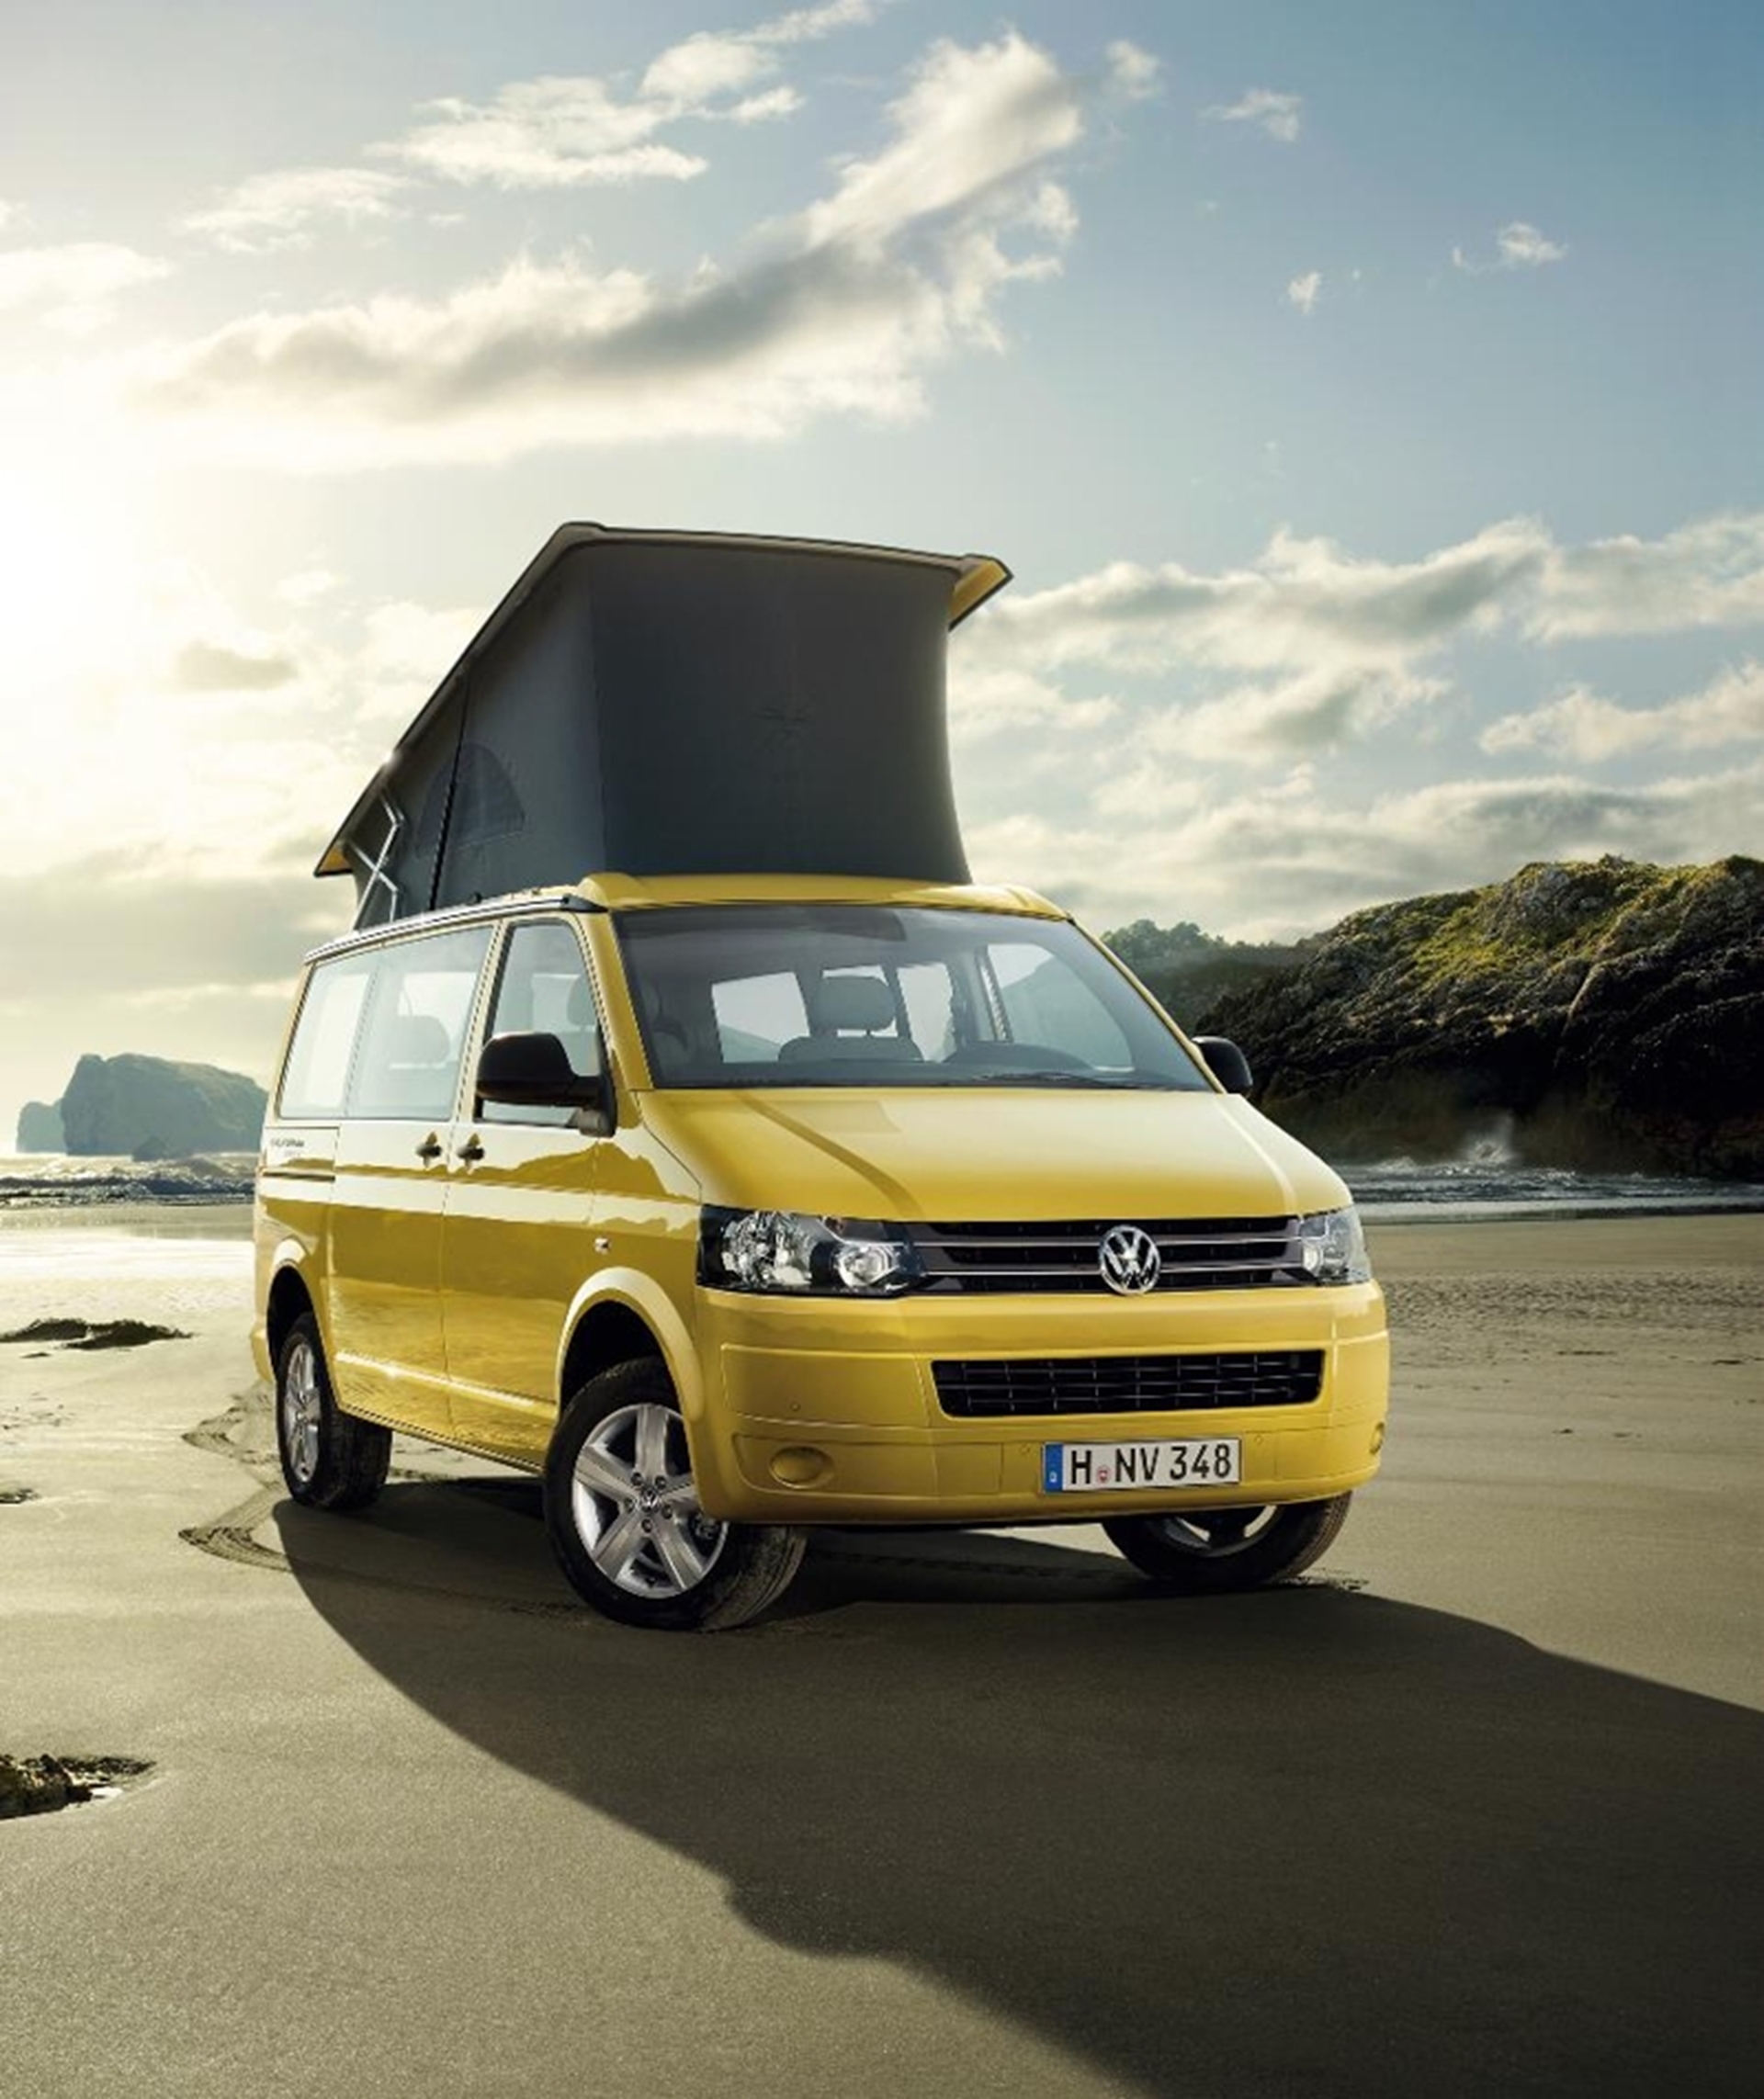 CALIFORNIA HOLIDAYS FROM £379 A MONTH WITH FREE SERVICING